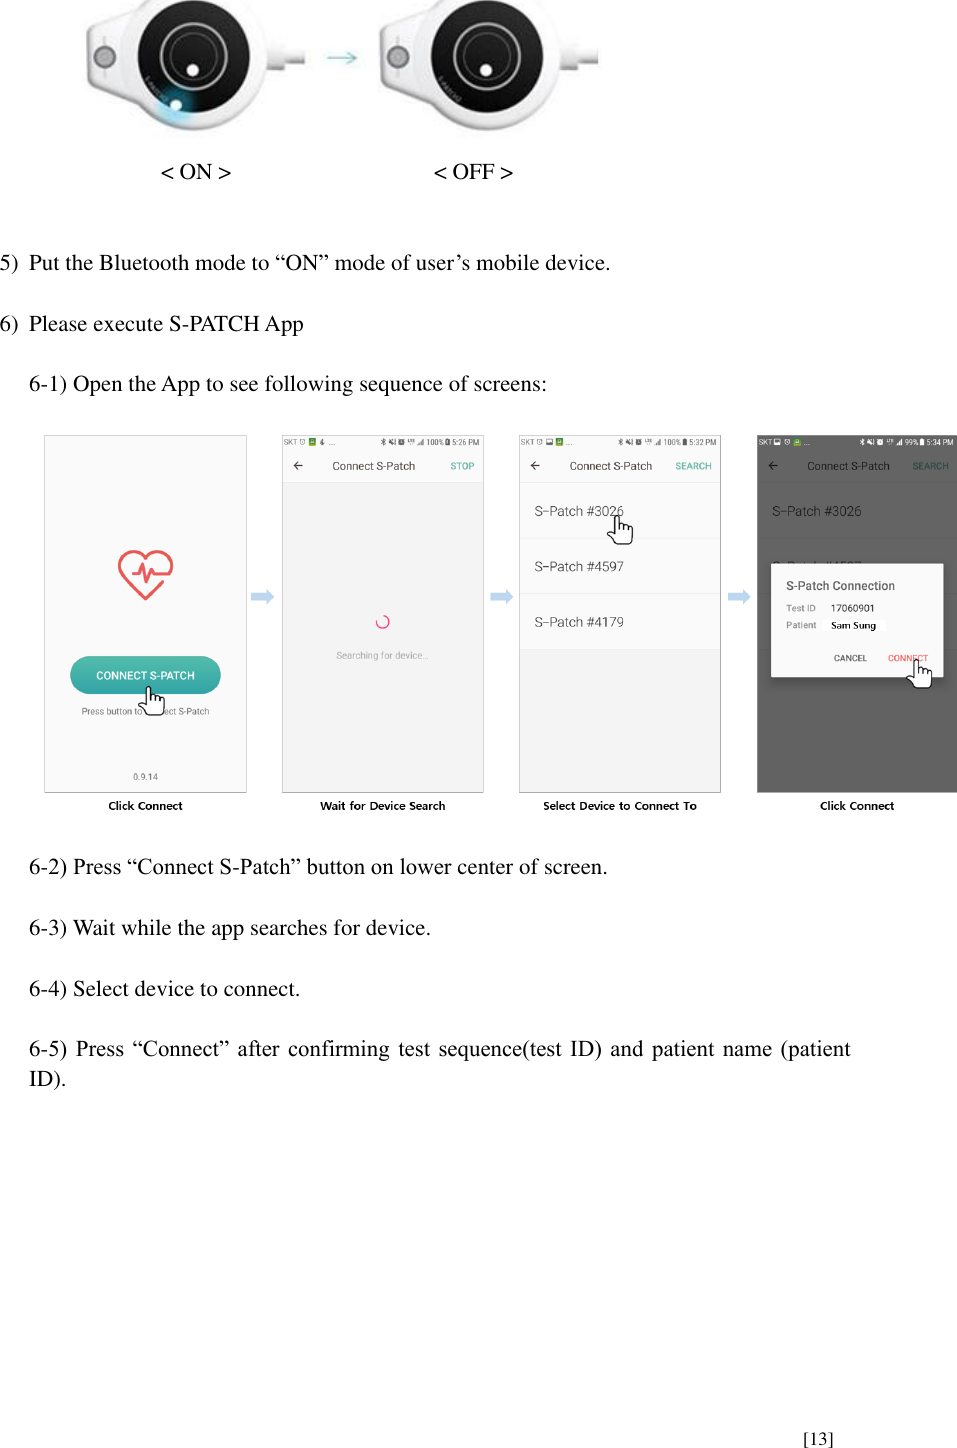      [13]   &lt; ON &gt;        &lt; OFF &gt;   5) Put the Bluetooth mode to “ON” mode of user’s mobile device.  6) Please execute S-PATCH App  6-1) Open the App to see following sequence of screens:    6-2) Press “Connect S-Patch” button on lower center of screen.  6-3) Wait while the app searches for device.  6-4) Select device to connect.  6-5)  Press “Connect”  after  confirming  test  sequence(test ID)  and  patient name  (patient ID).          